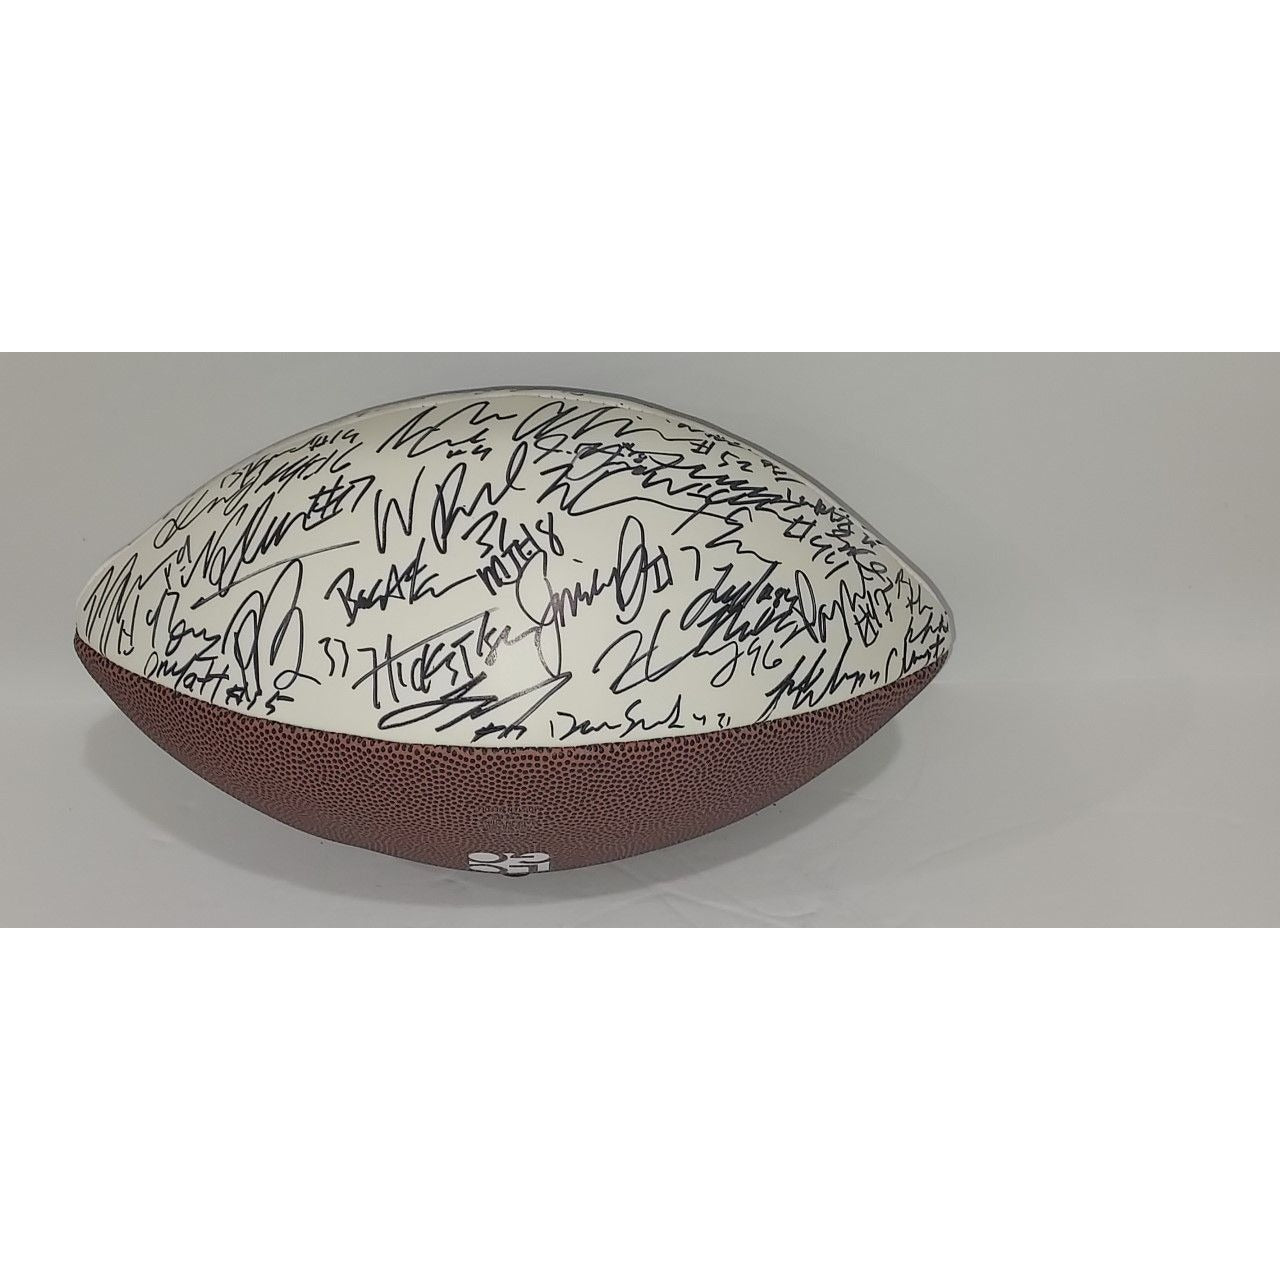 Georgia Bulldogs 2022-23 Stetson Bennett, Brock Bowers, Kirby Smart team signed football with proof with free case